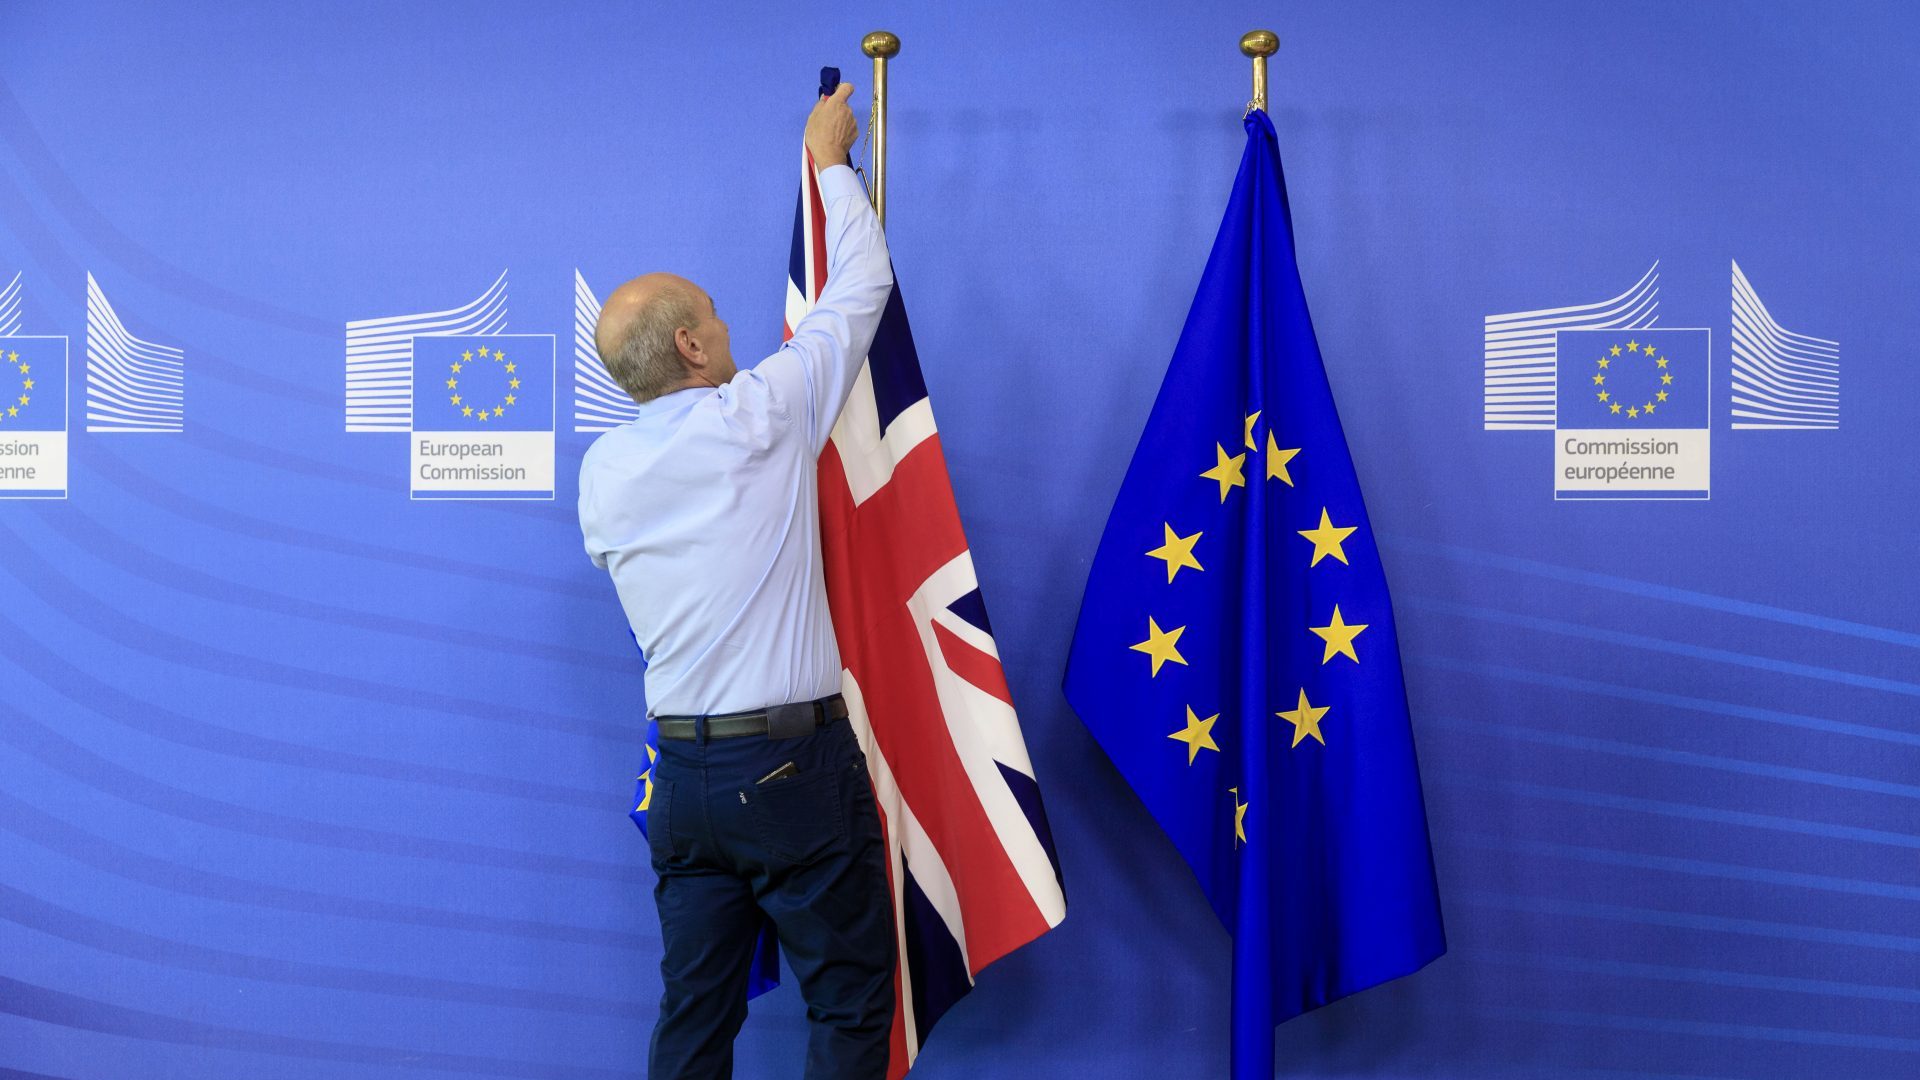 A man takes down the British flag at the European Commission. Photo: Andia/Universal Images/Getty